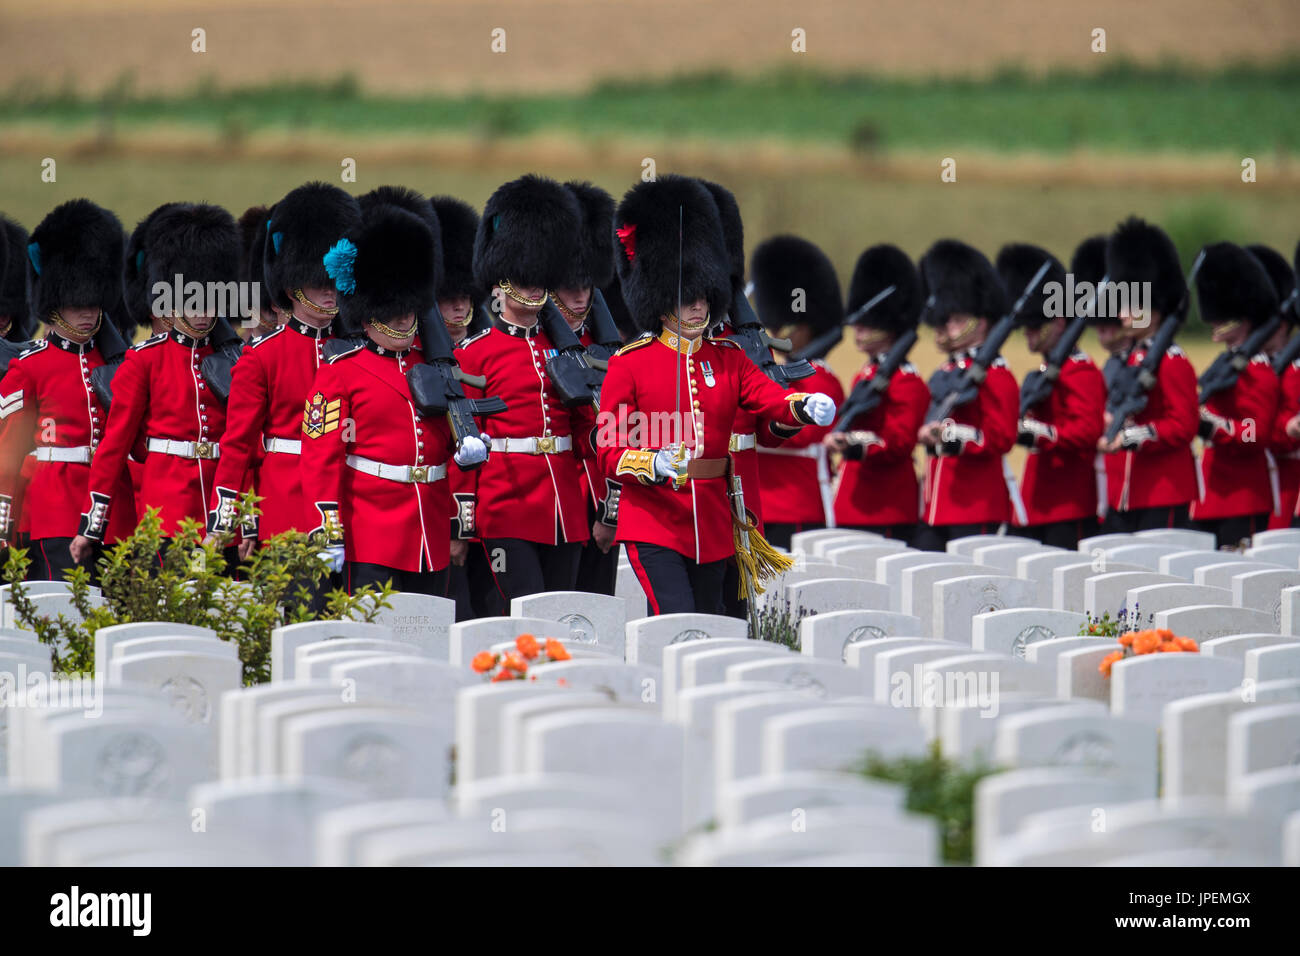 British Troops take part in the commemoration events for the World War One Battle of Passchendaele at the Tyne Cot Cemetery near Ypres in Belgium. The 1st Battalion of the Irish Guards march through the grave stones Stock Photo